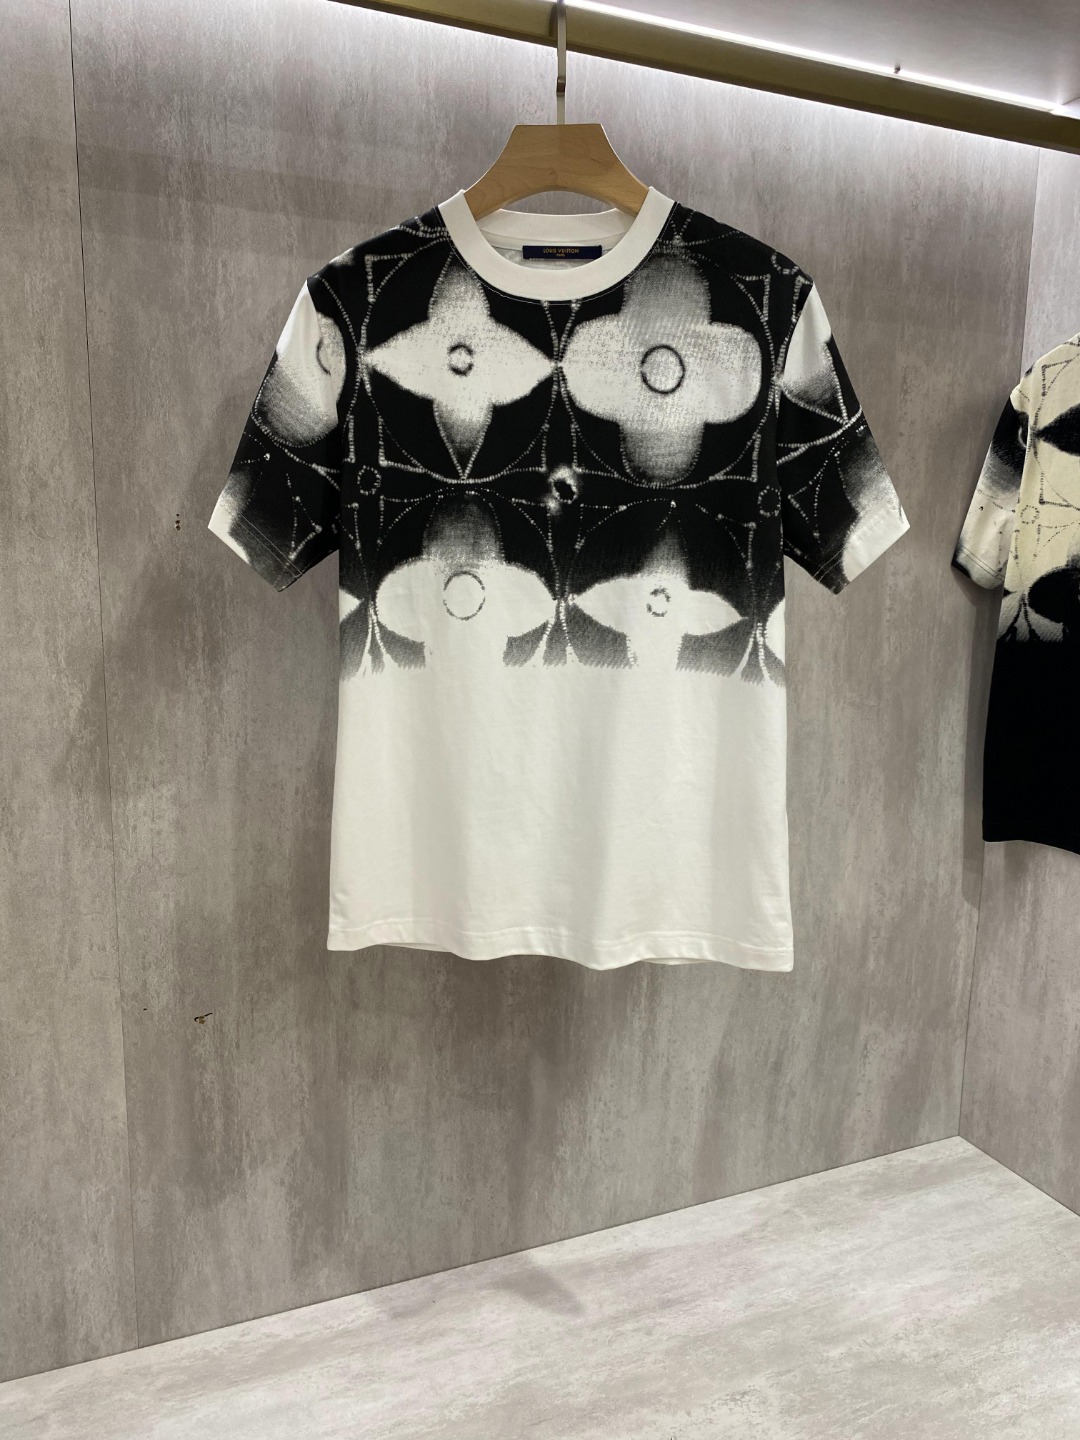 Louis Vuitton Clothing T-Shirt Black White Printing Unisex Combed Cotton Spring/Summer Collection Short Sleeve